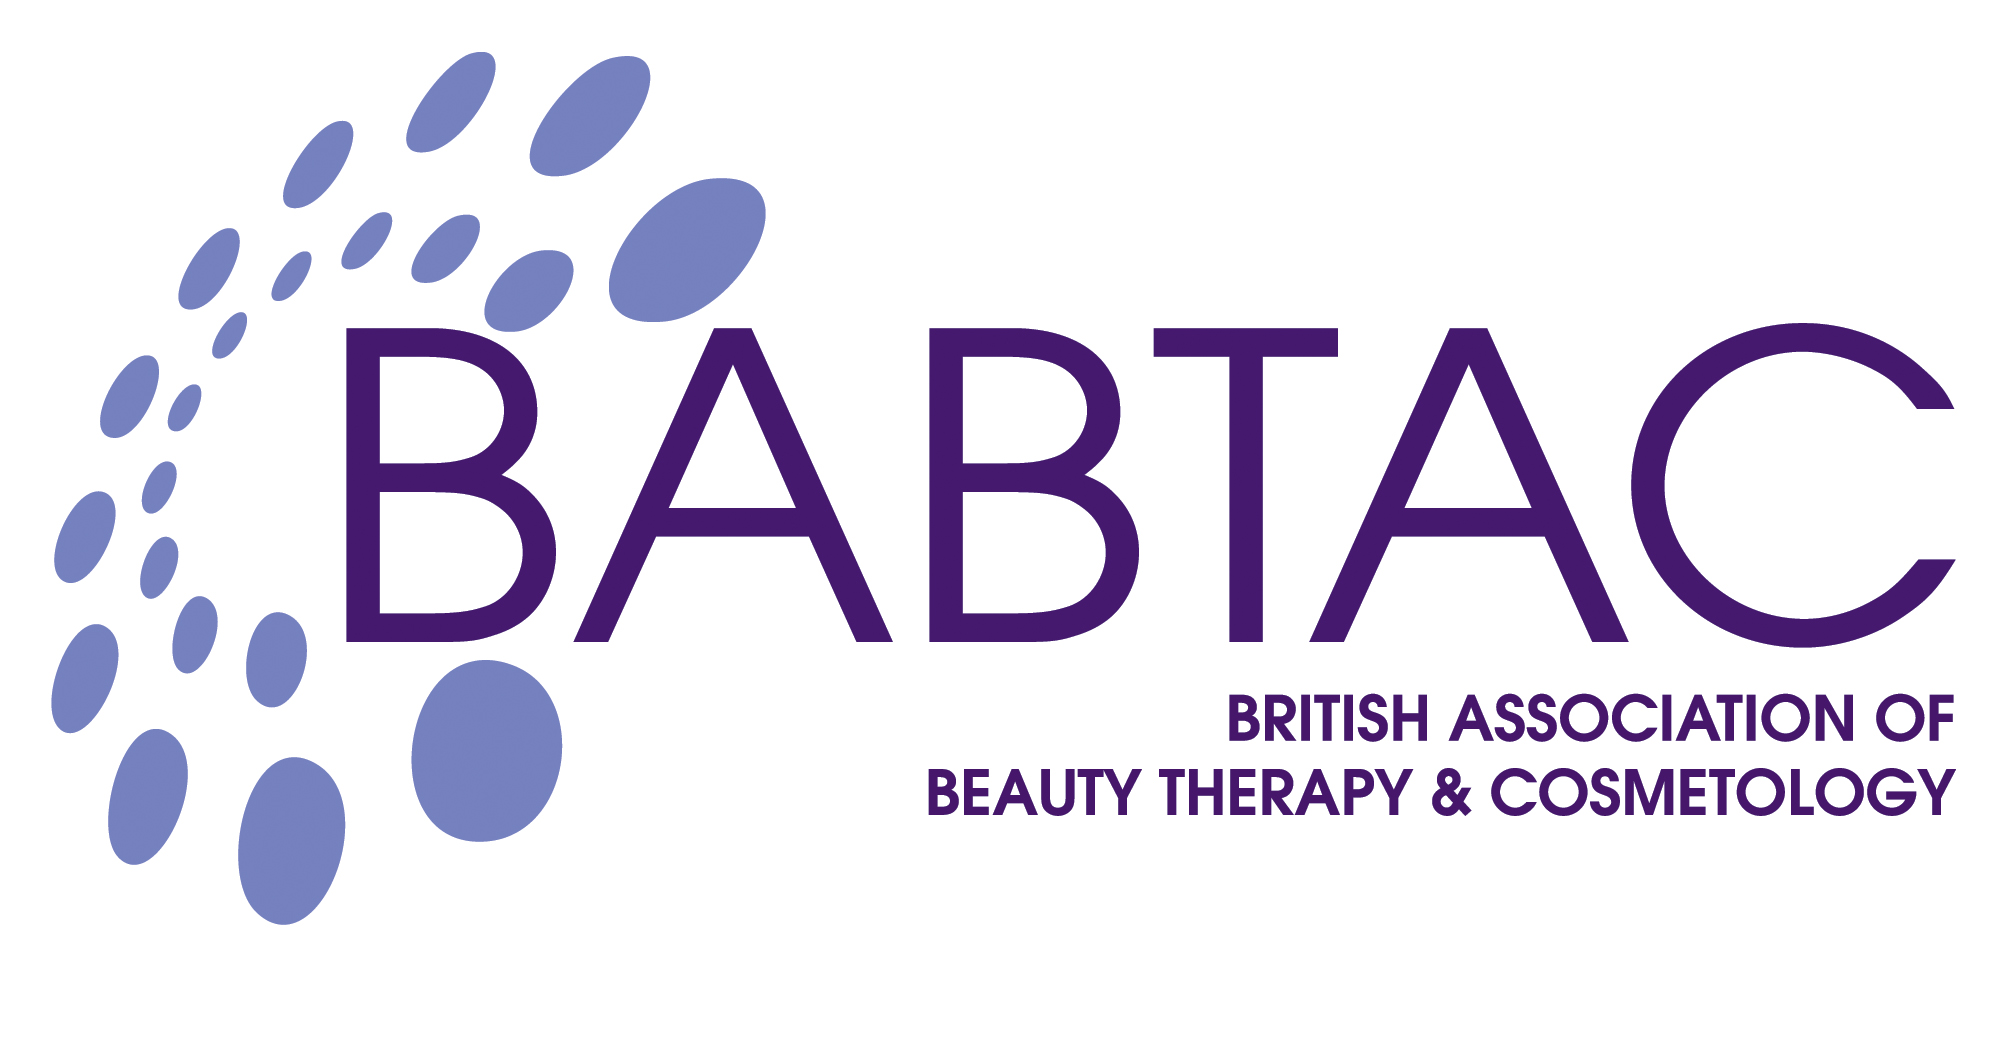 Profile picture for British Association of Beauty Therapy & Cosmetology - BABTAC